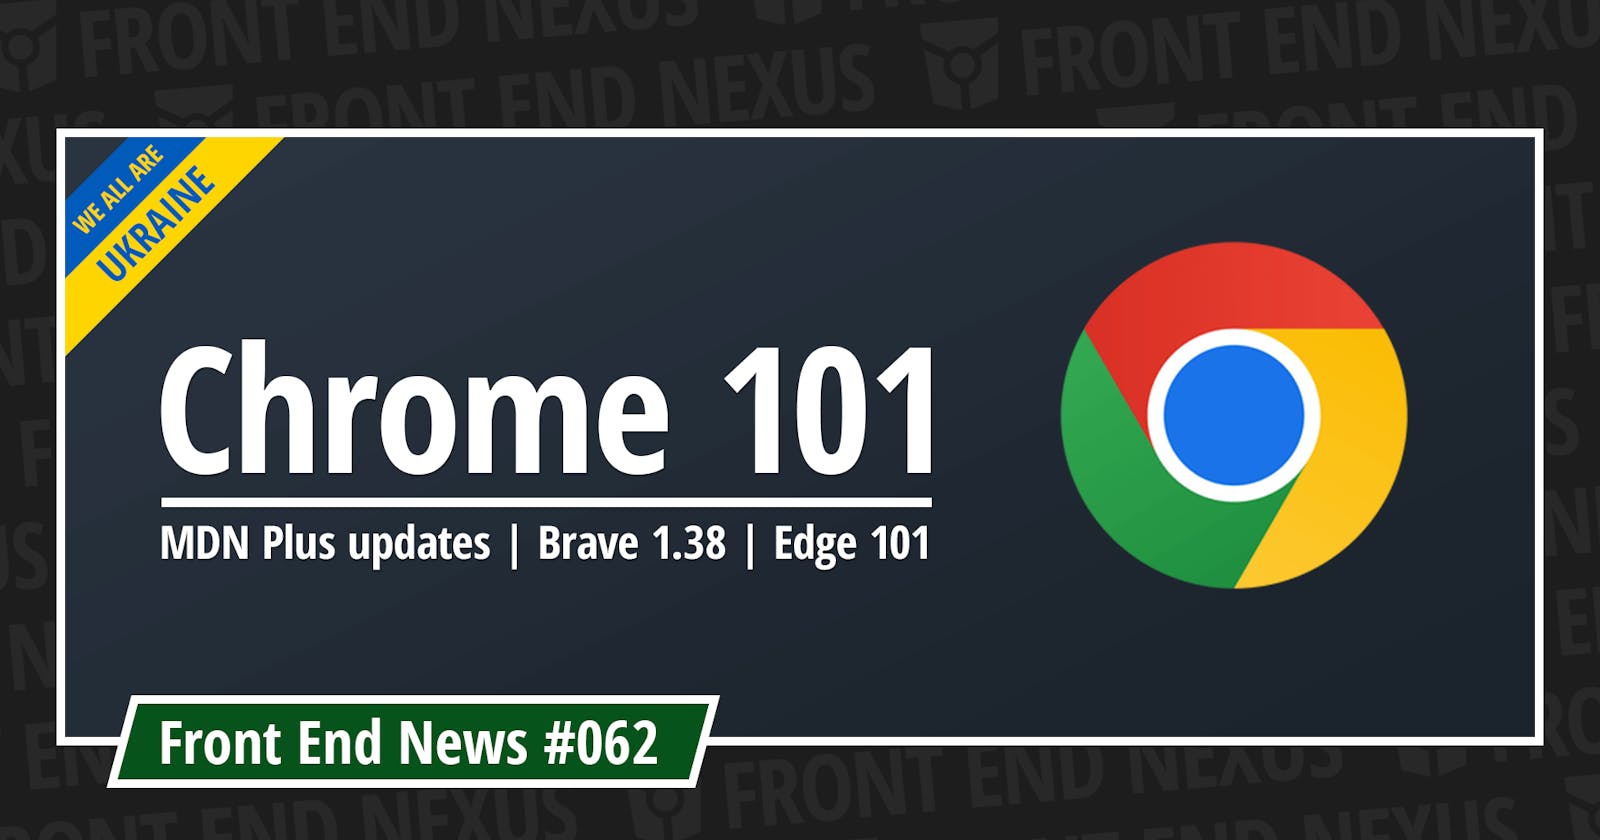 Chrome 101, MDN Plus updates, Brave 1.38, Edge 101, Node v16.15.0 (LTS), React 18.1.0, and more | Front End News #062